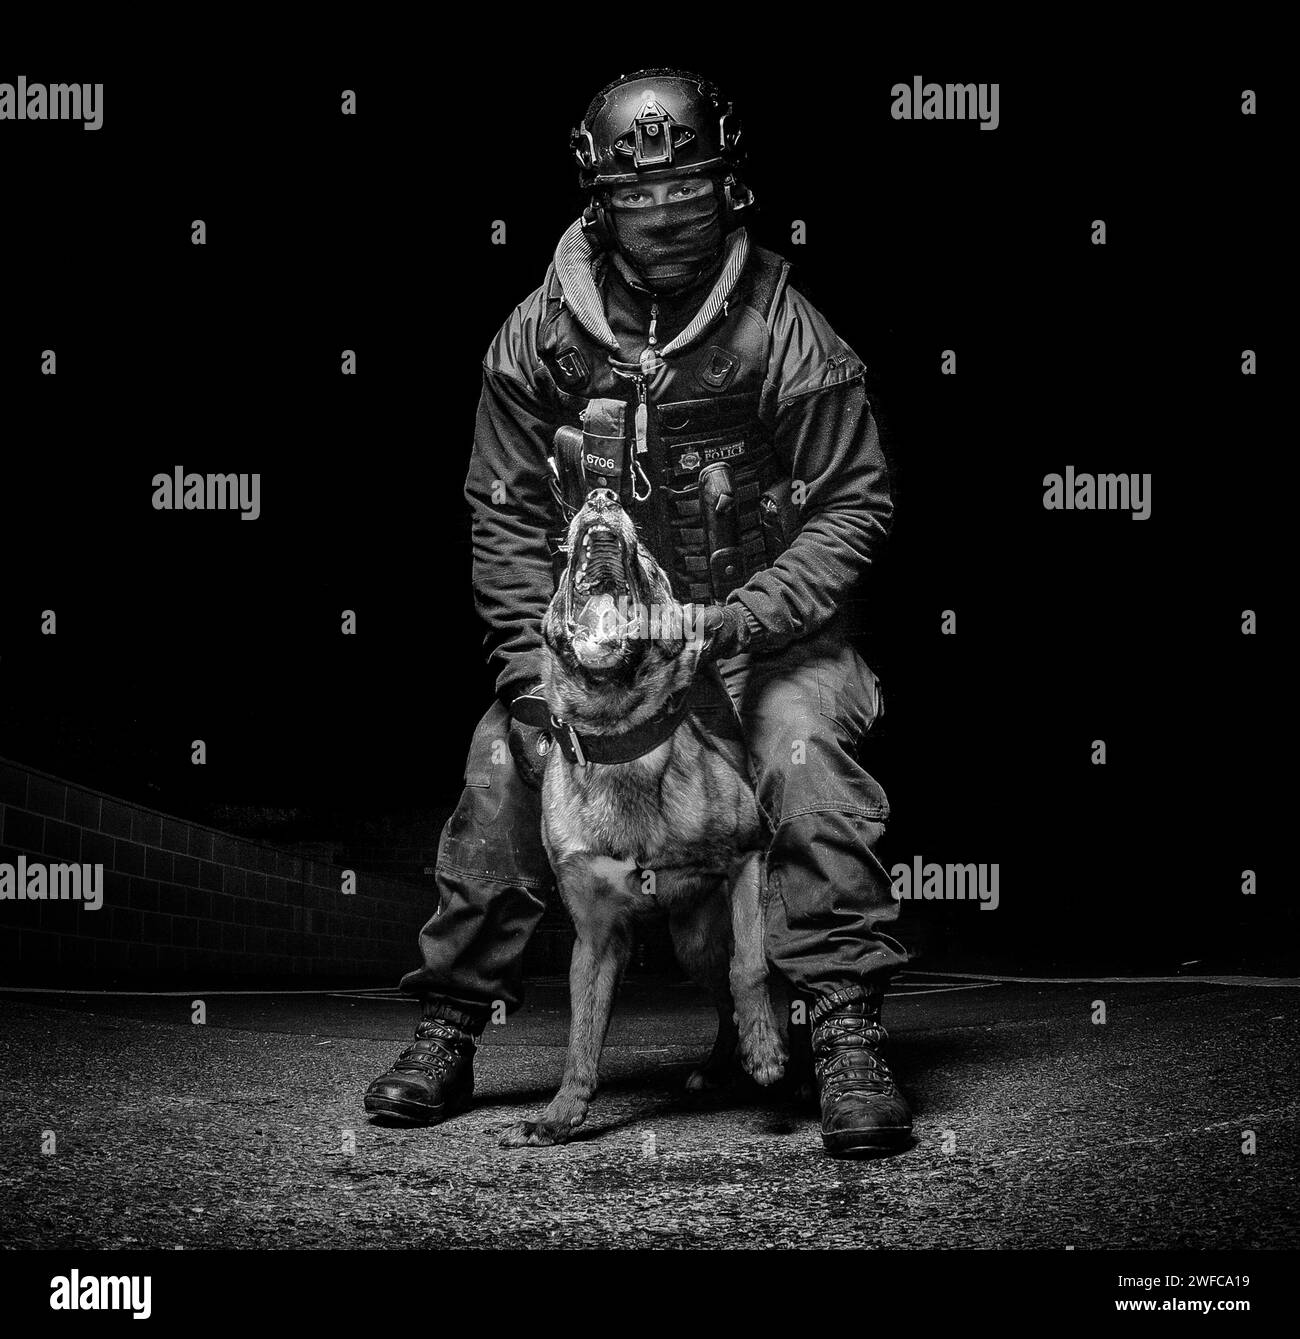 UK Police dog handler dressed in firearms kit with aggressive firearms support dog looking at camera Stock Photo